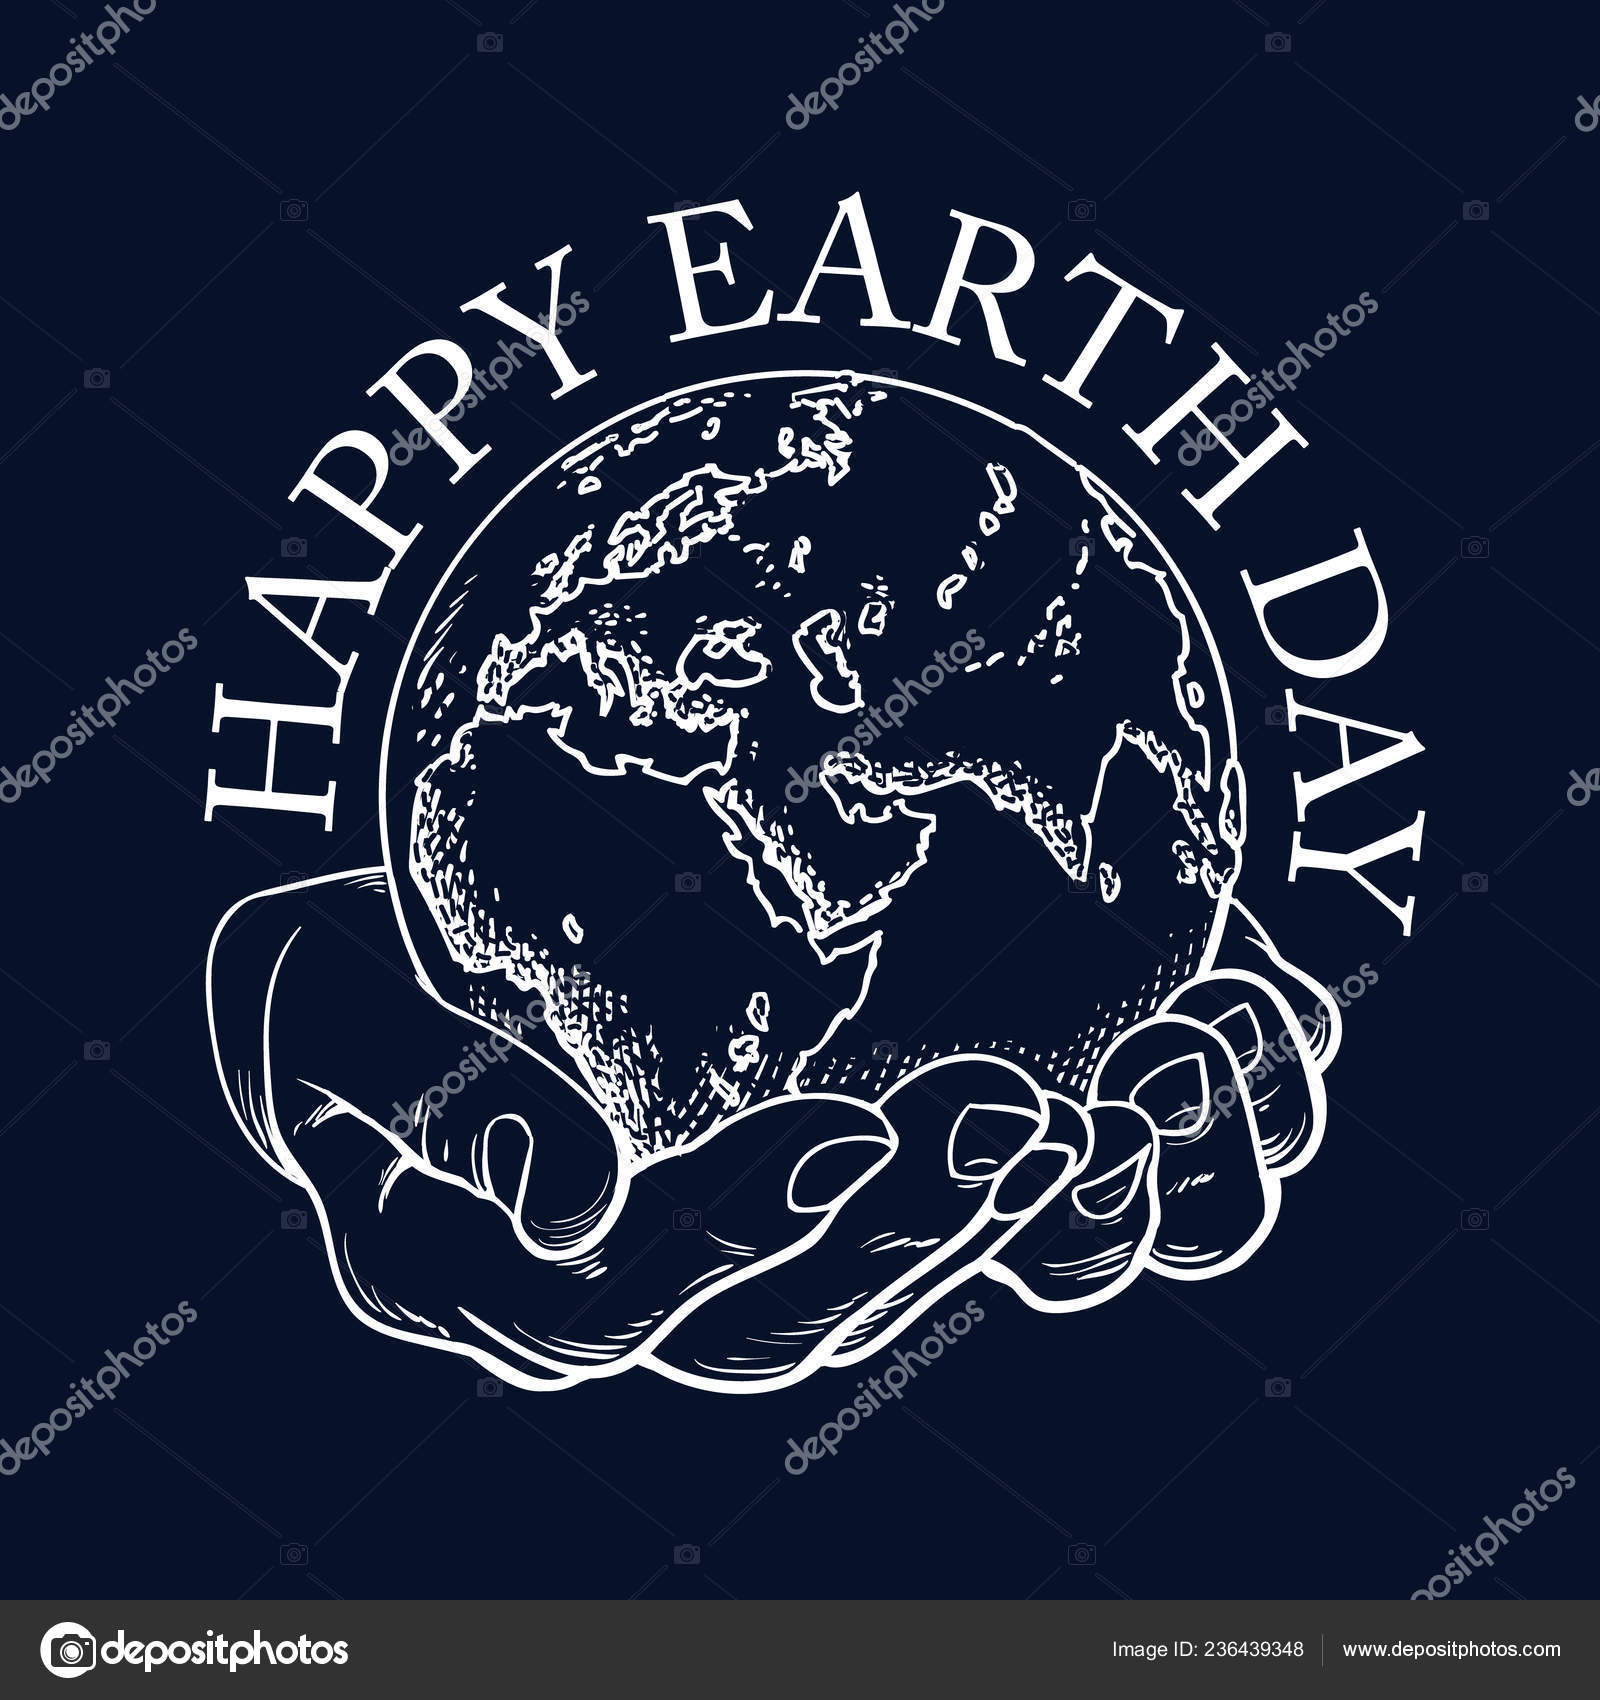 Arty's World - HOW TO MAKE EARTH DAY POSTER || EARTH DAY POSTER DRAWING||  EASY SAVE EARTH DRAWING https://youtu.be/VxX--3dlJVE | Facebook